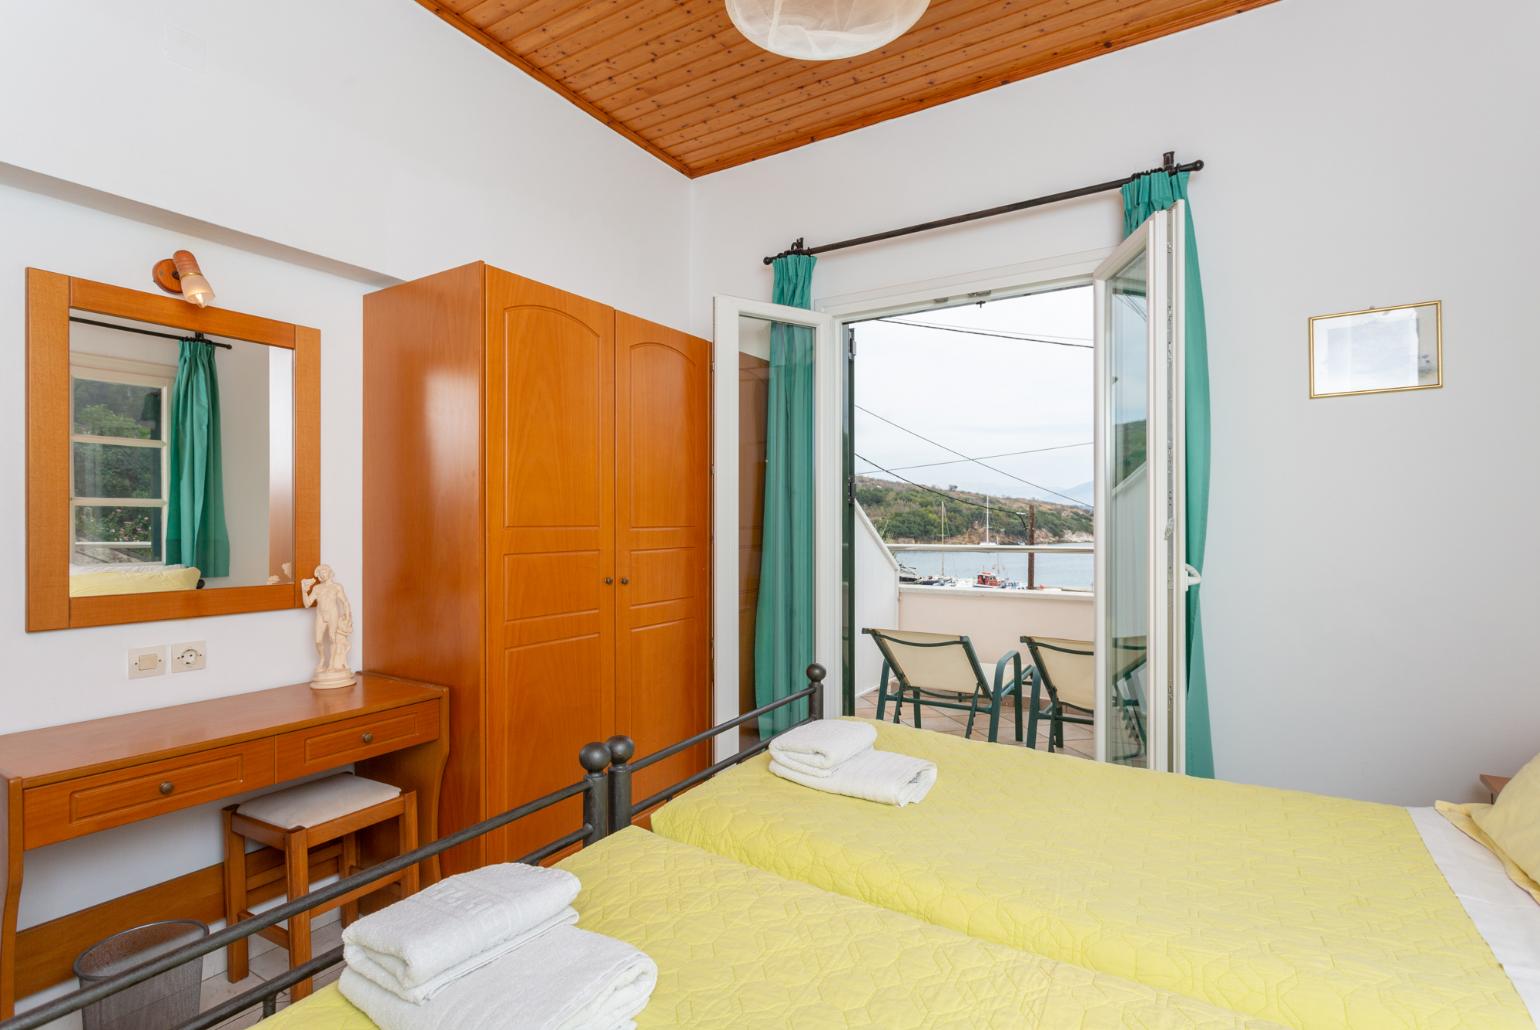 Twin bedroom with A/C and terrace access with sea views